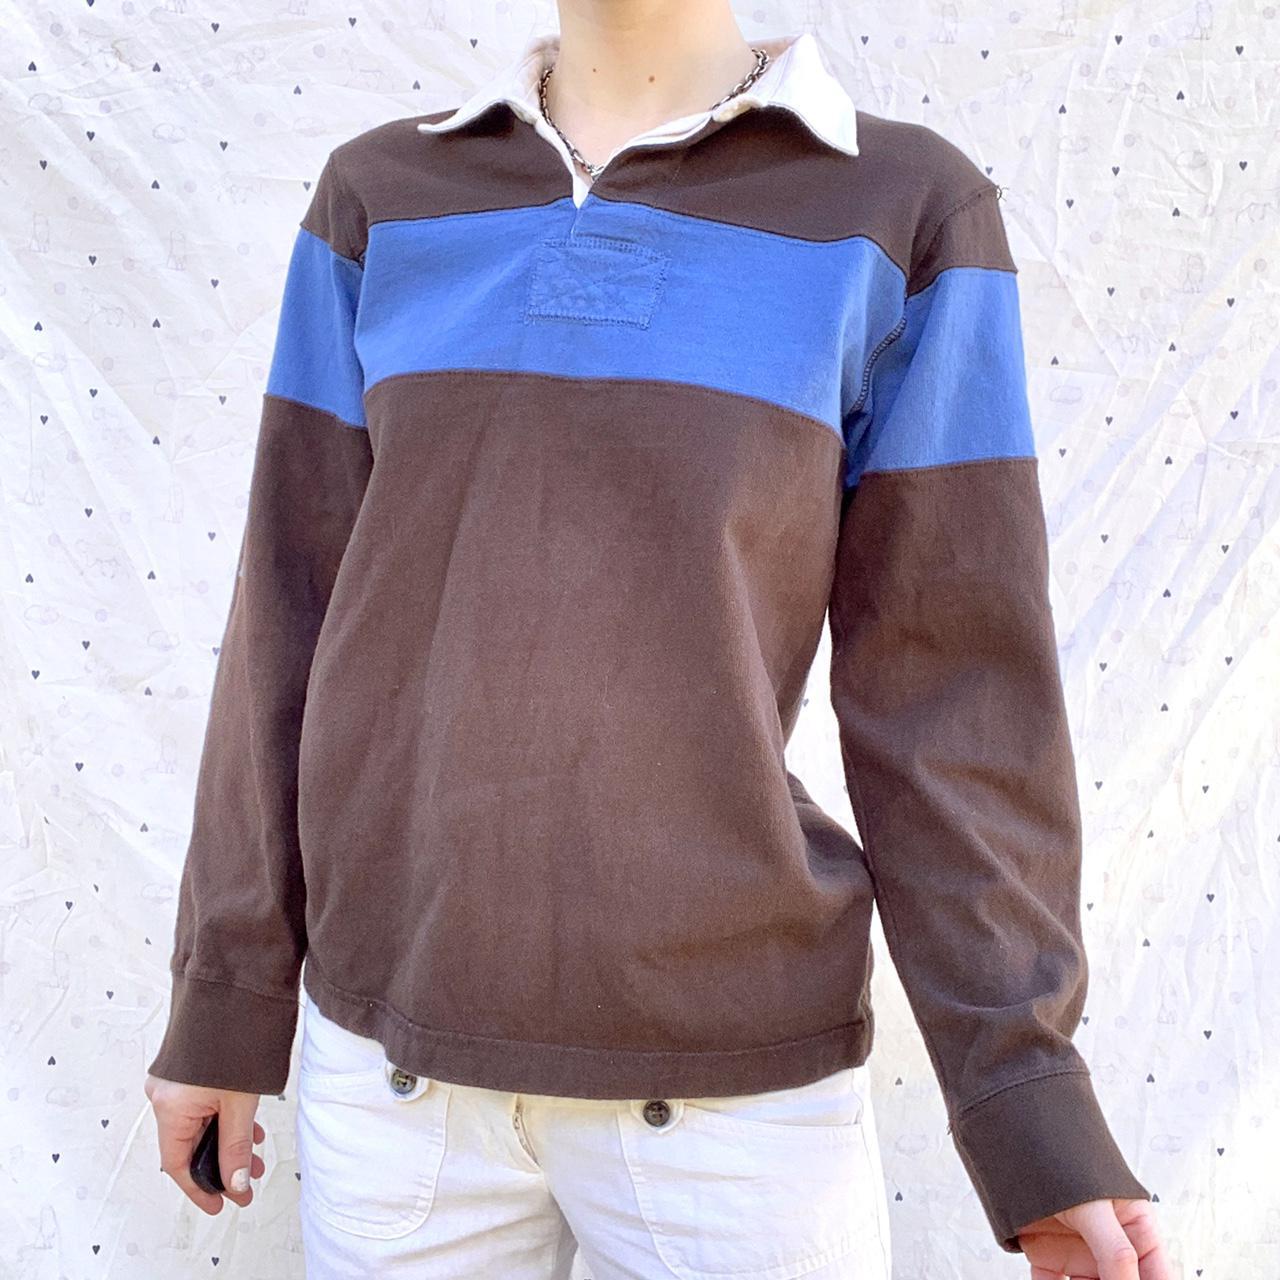 Product Image 2 - 💙 Urban Pipeline brown/blue collared